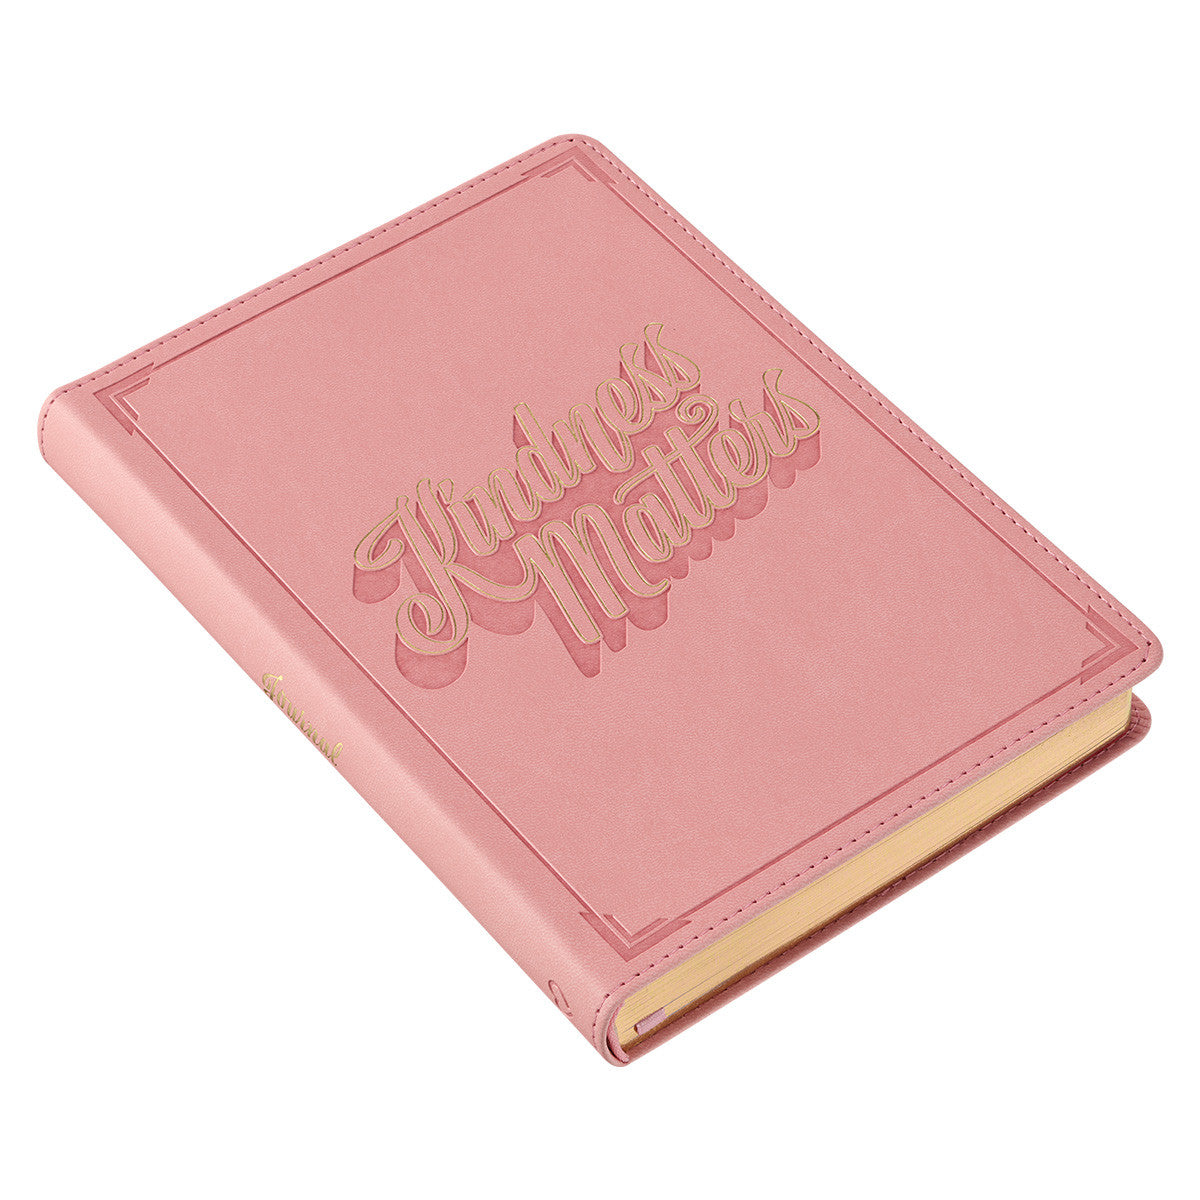 Kindness Matters Pink Faux Leather Classic Journal - The Christian Gift Company